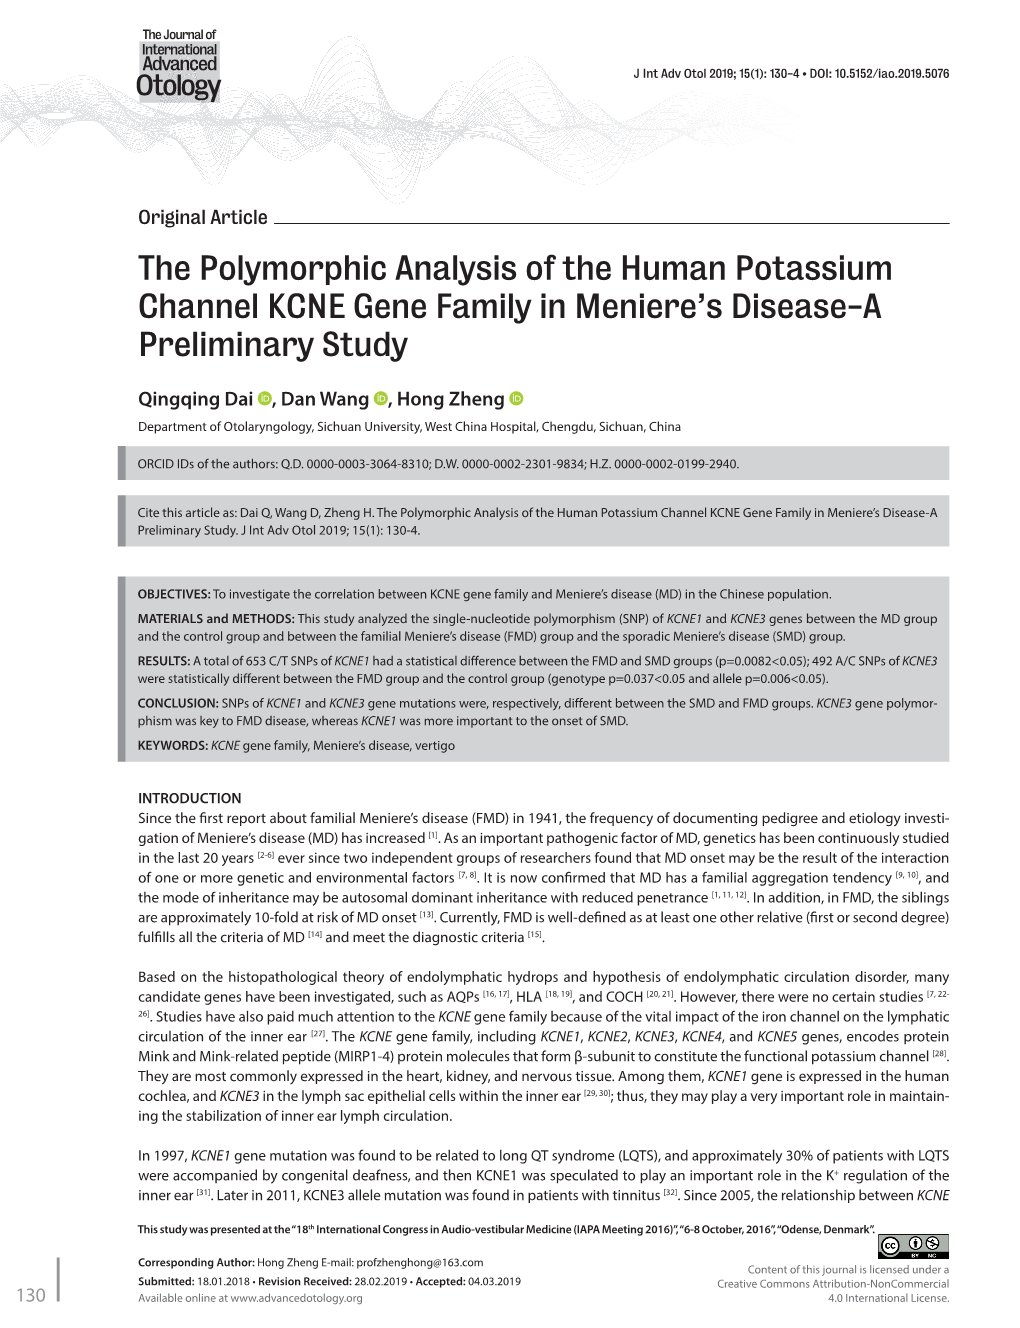 The Polymorphic Analysis of the Human Potassium Channel KCNE Gene Family in Meniere’S Disease-A Preliminary Study